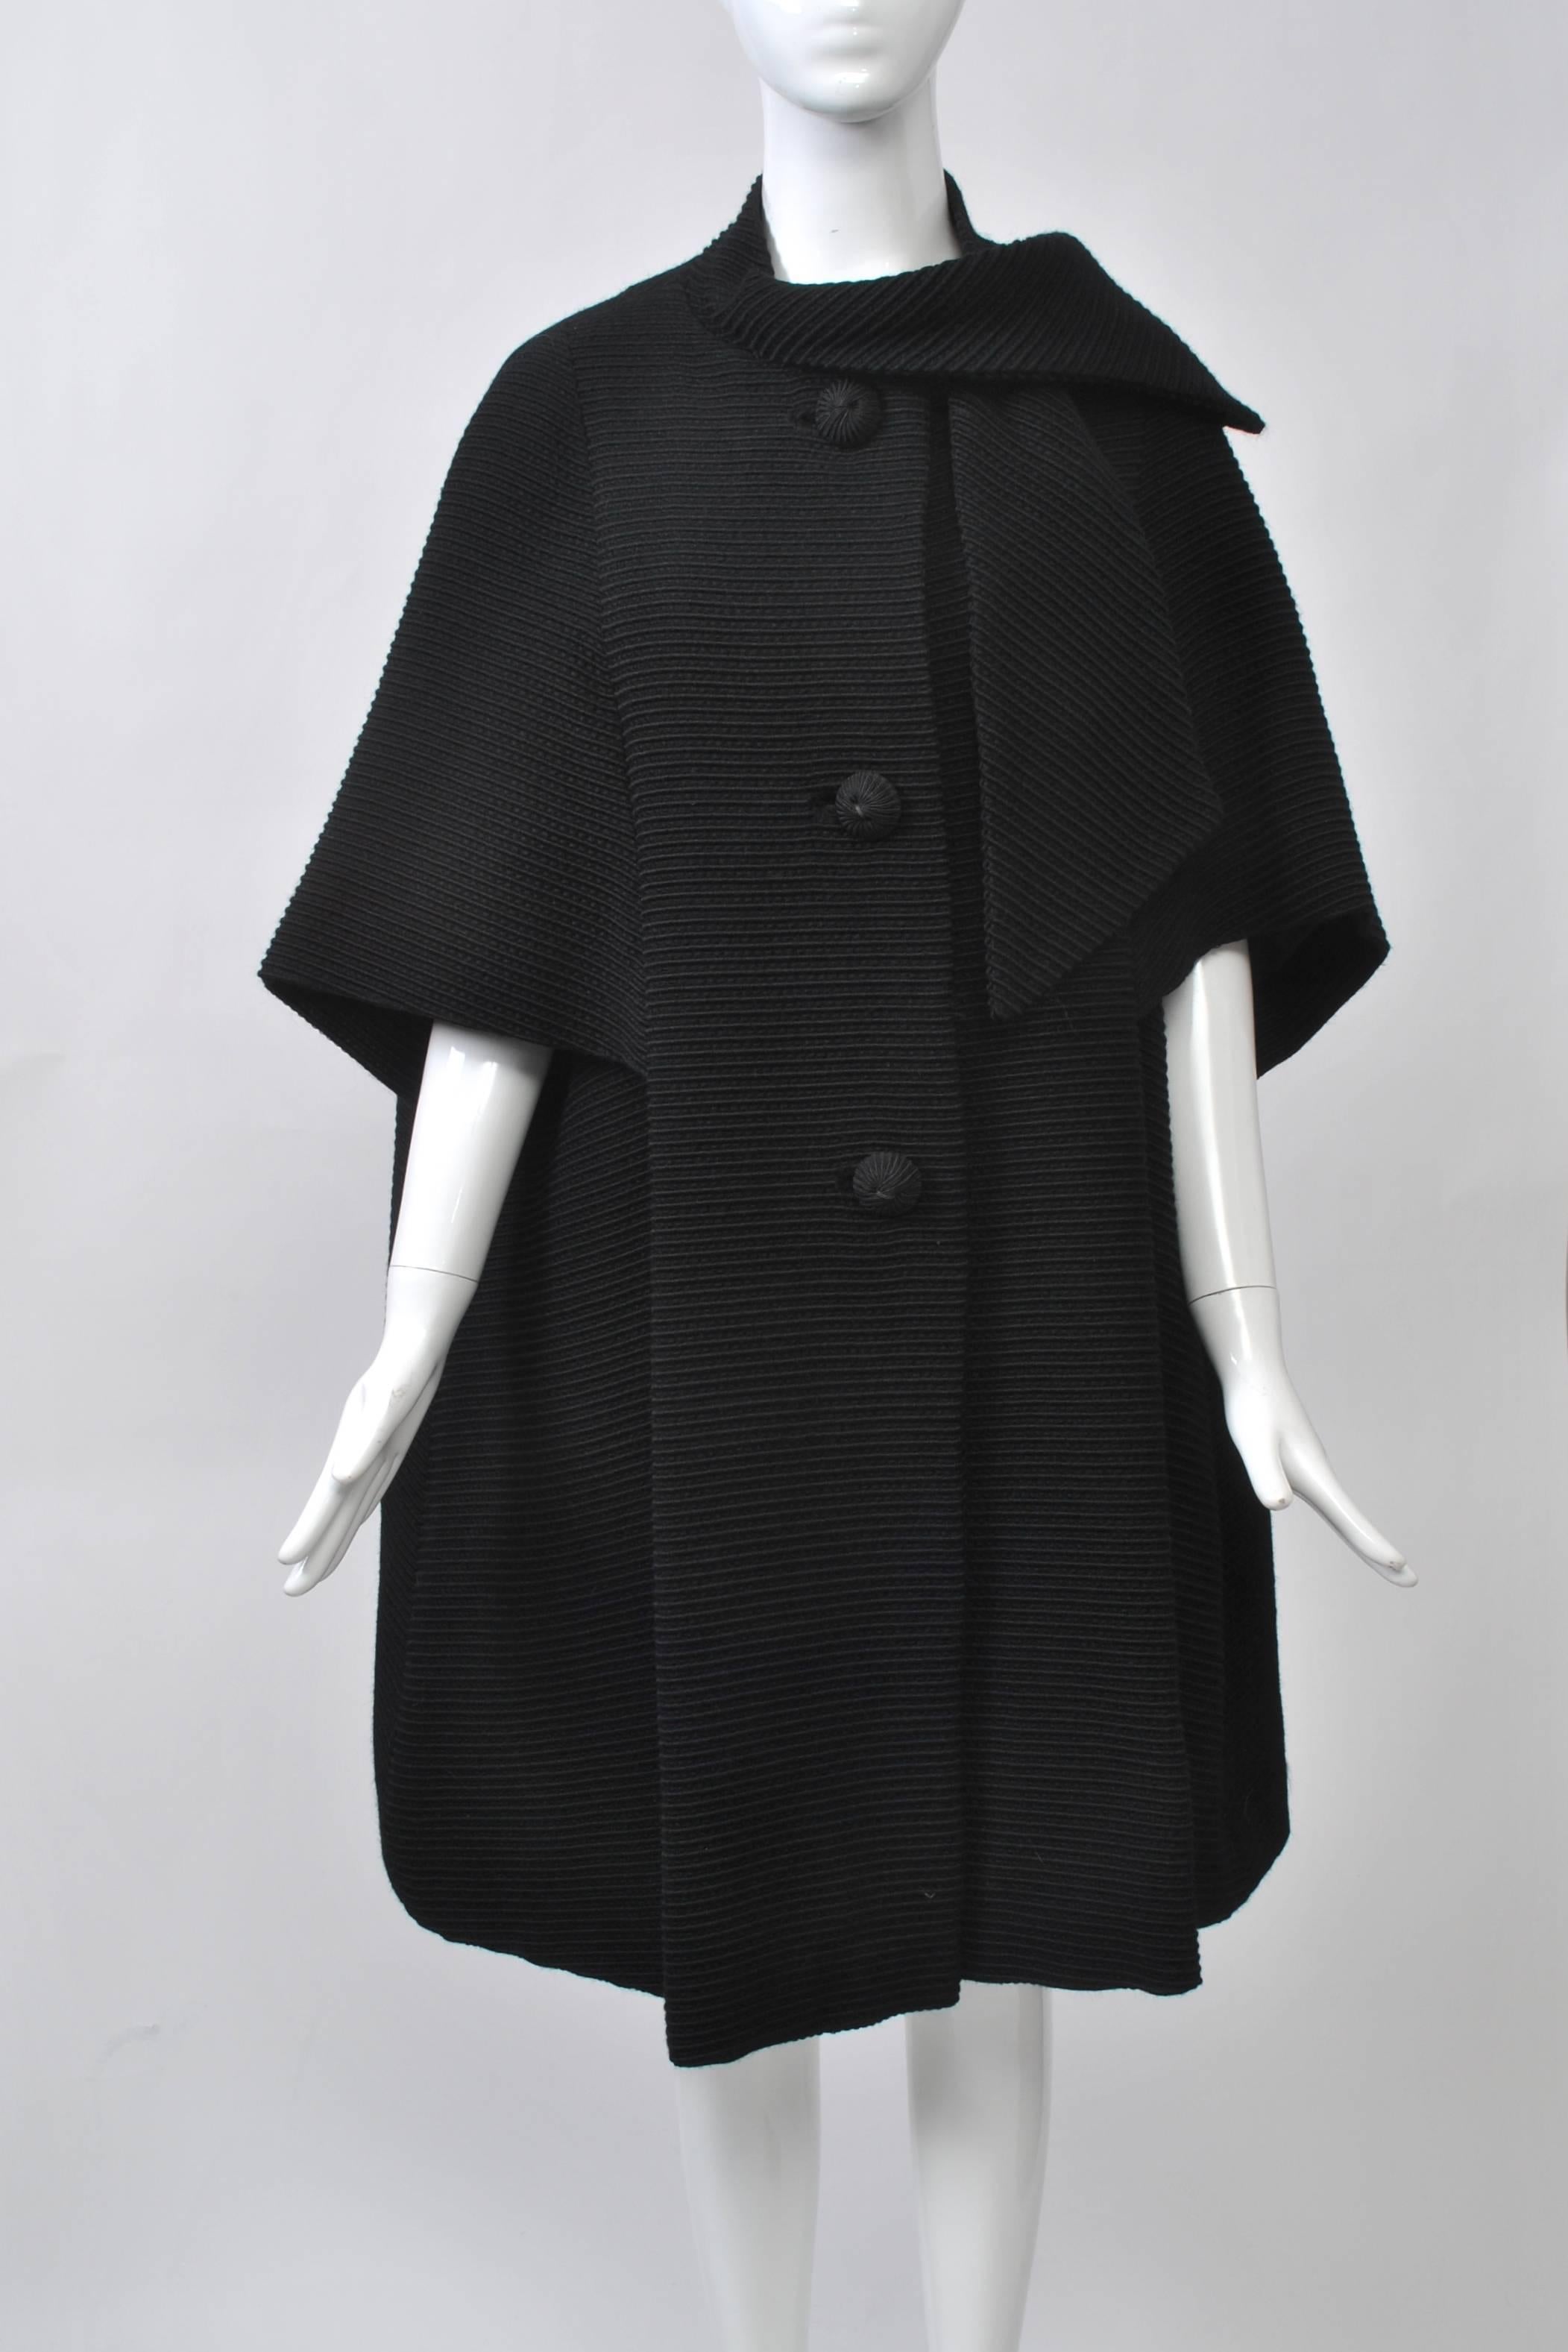 Stunning 1960s coat with elbow-length cape sleeves in heavy black ottoman-ribbed wool. Swing style with three large cord buttons and self tie at neck. Black satin lining is interlined for warmth. Unlabeled. Fits S-M.